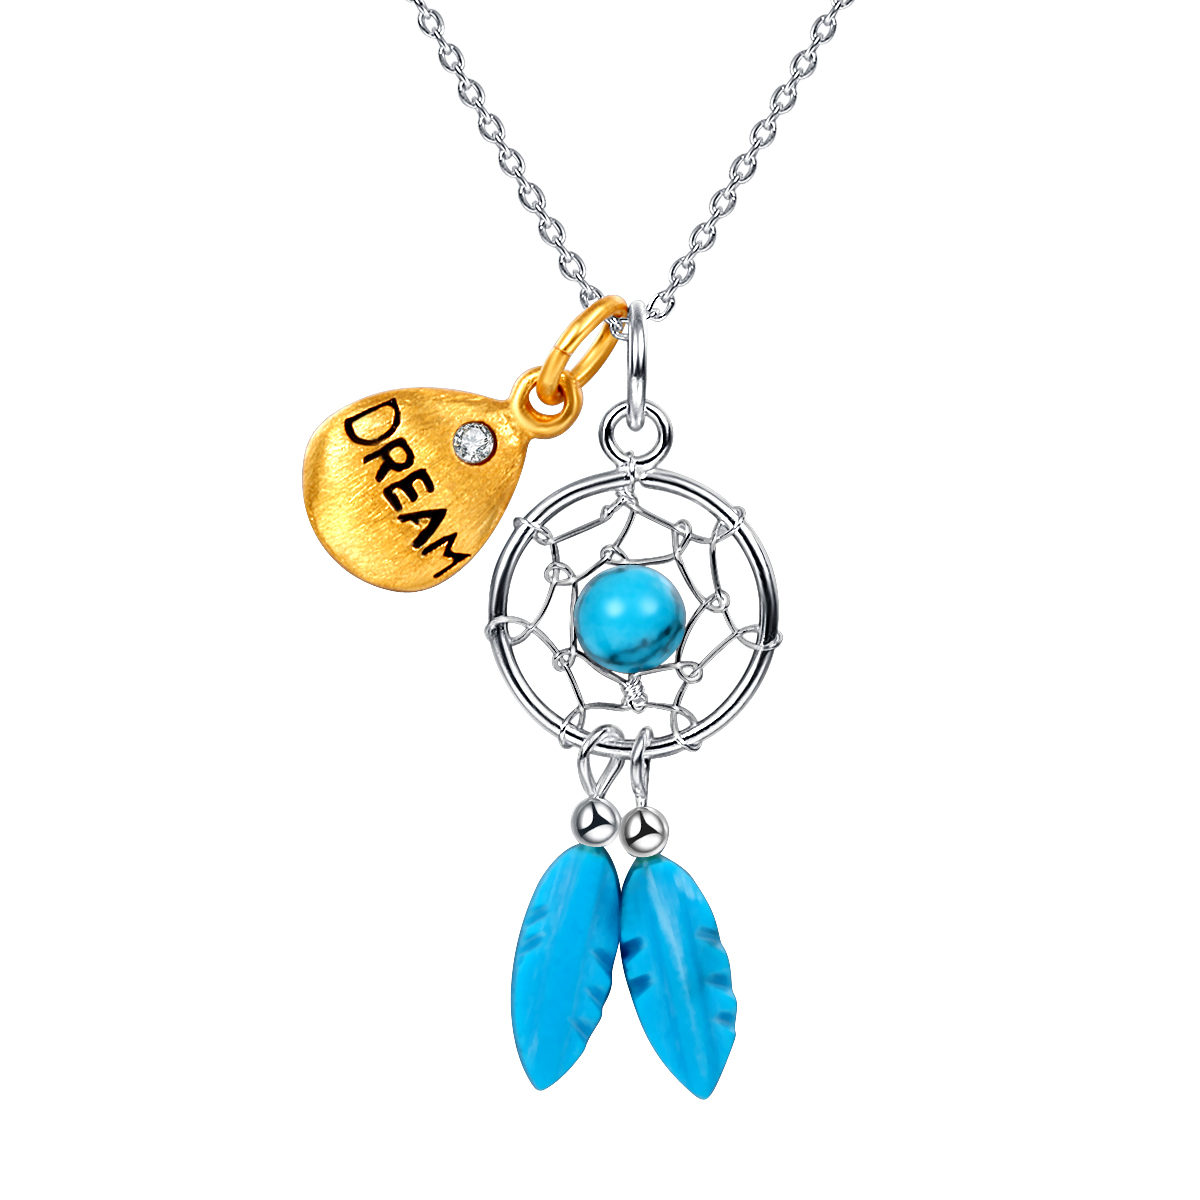 Yan & Lei Sterling Silver Handmade Dream Catcher Pendants With Turquoise Feathers And Golden Drop With Dream Lettering And Cz Setting